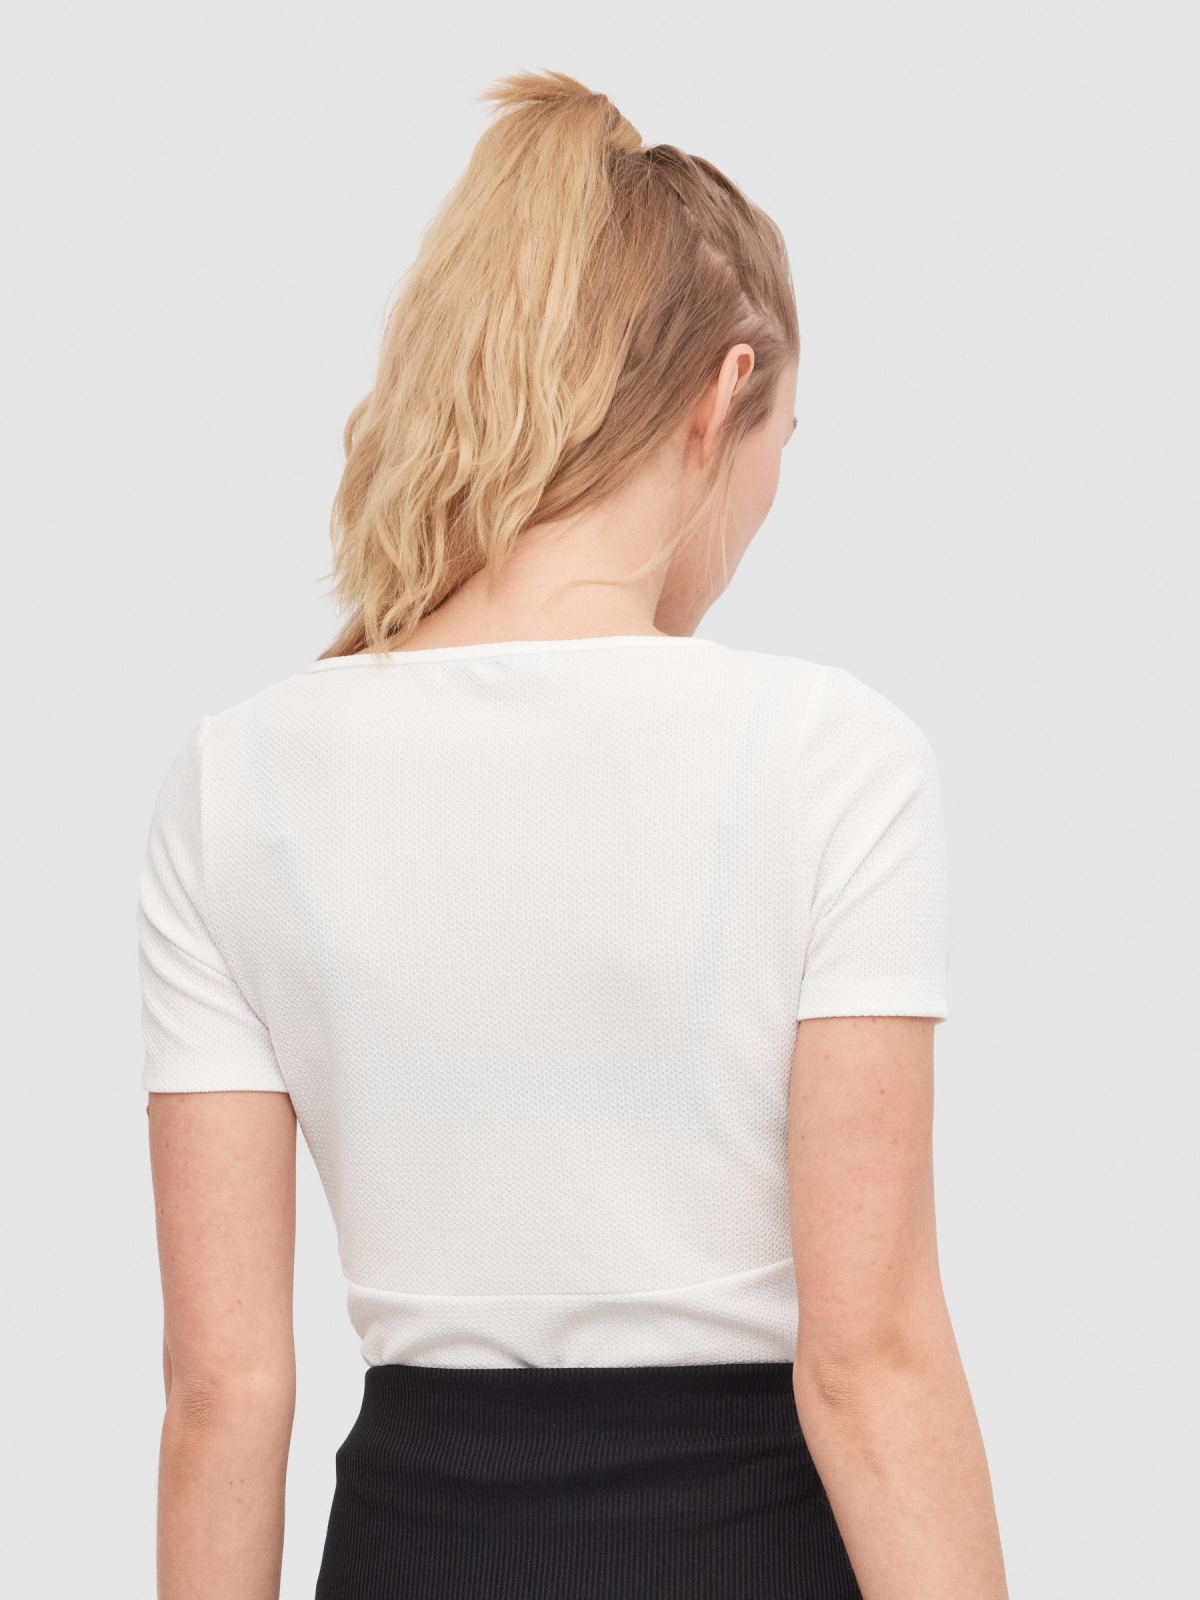 Crop cross neck t-shirt white middle back view